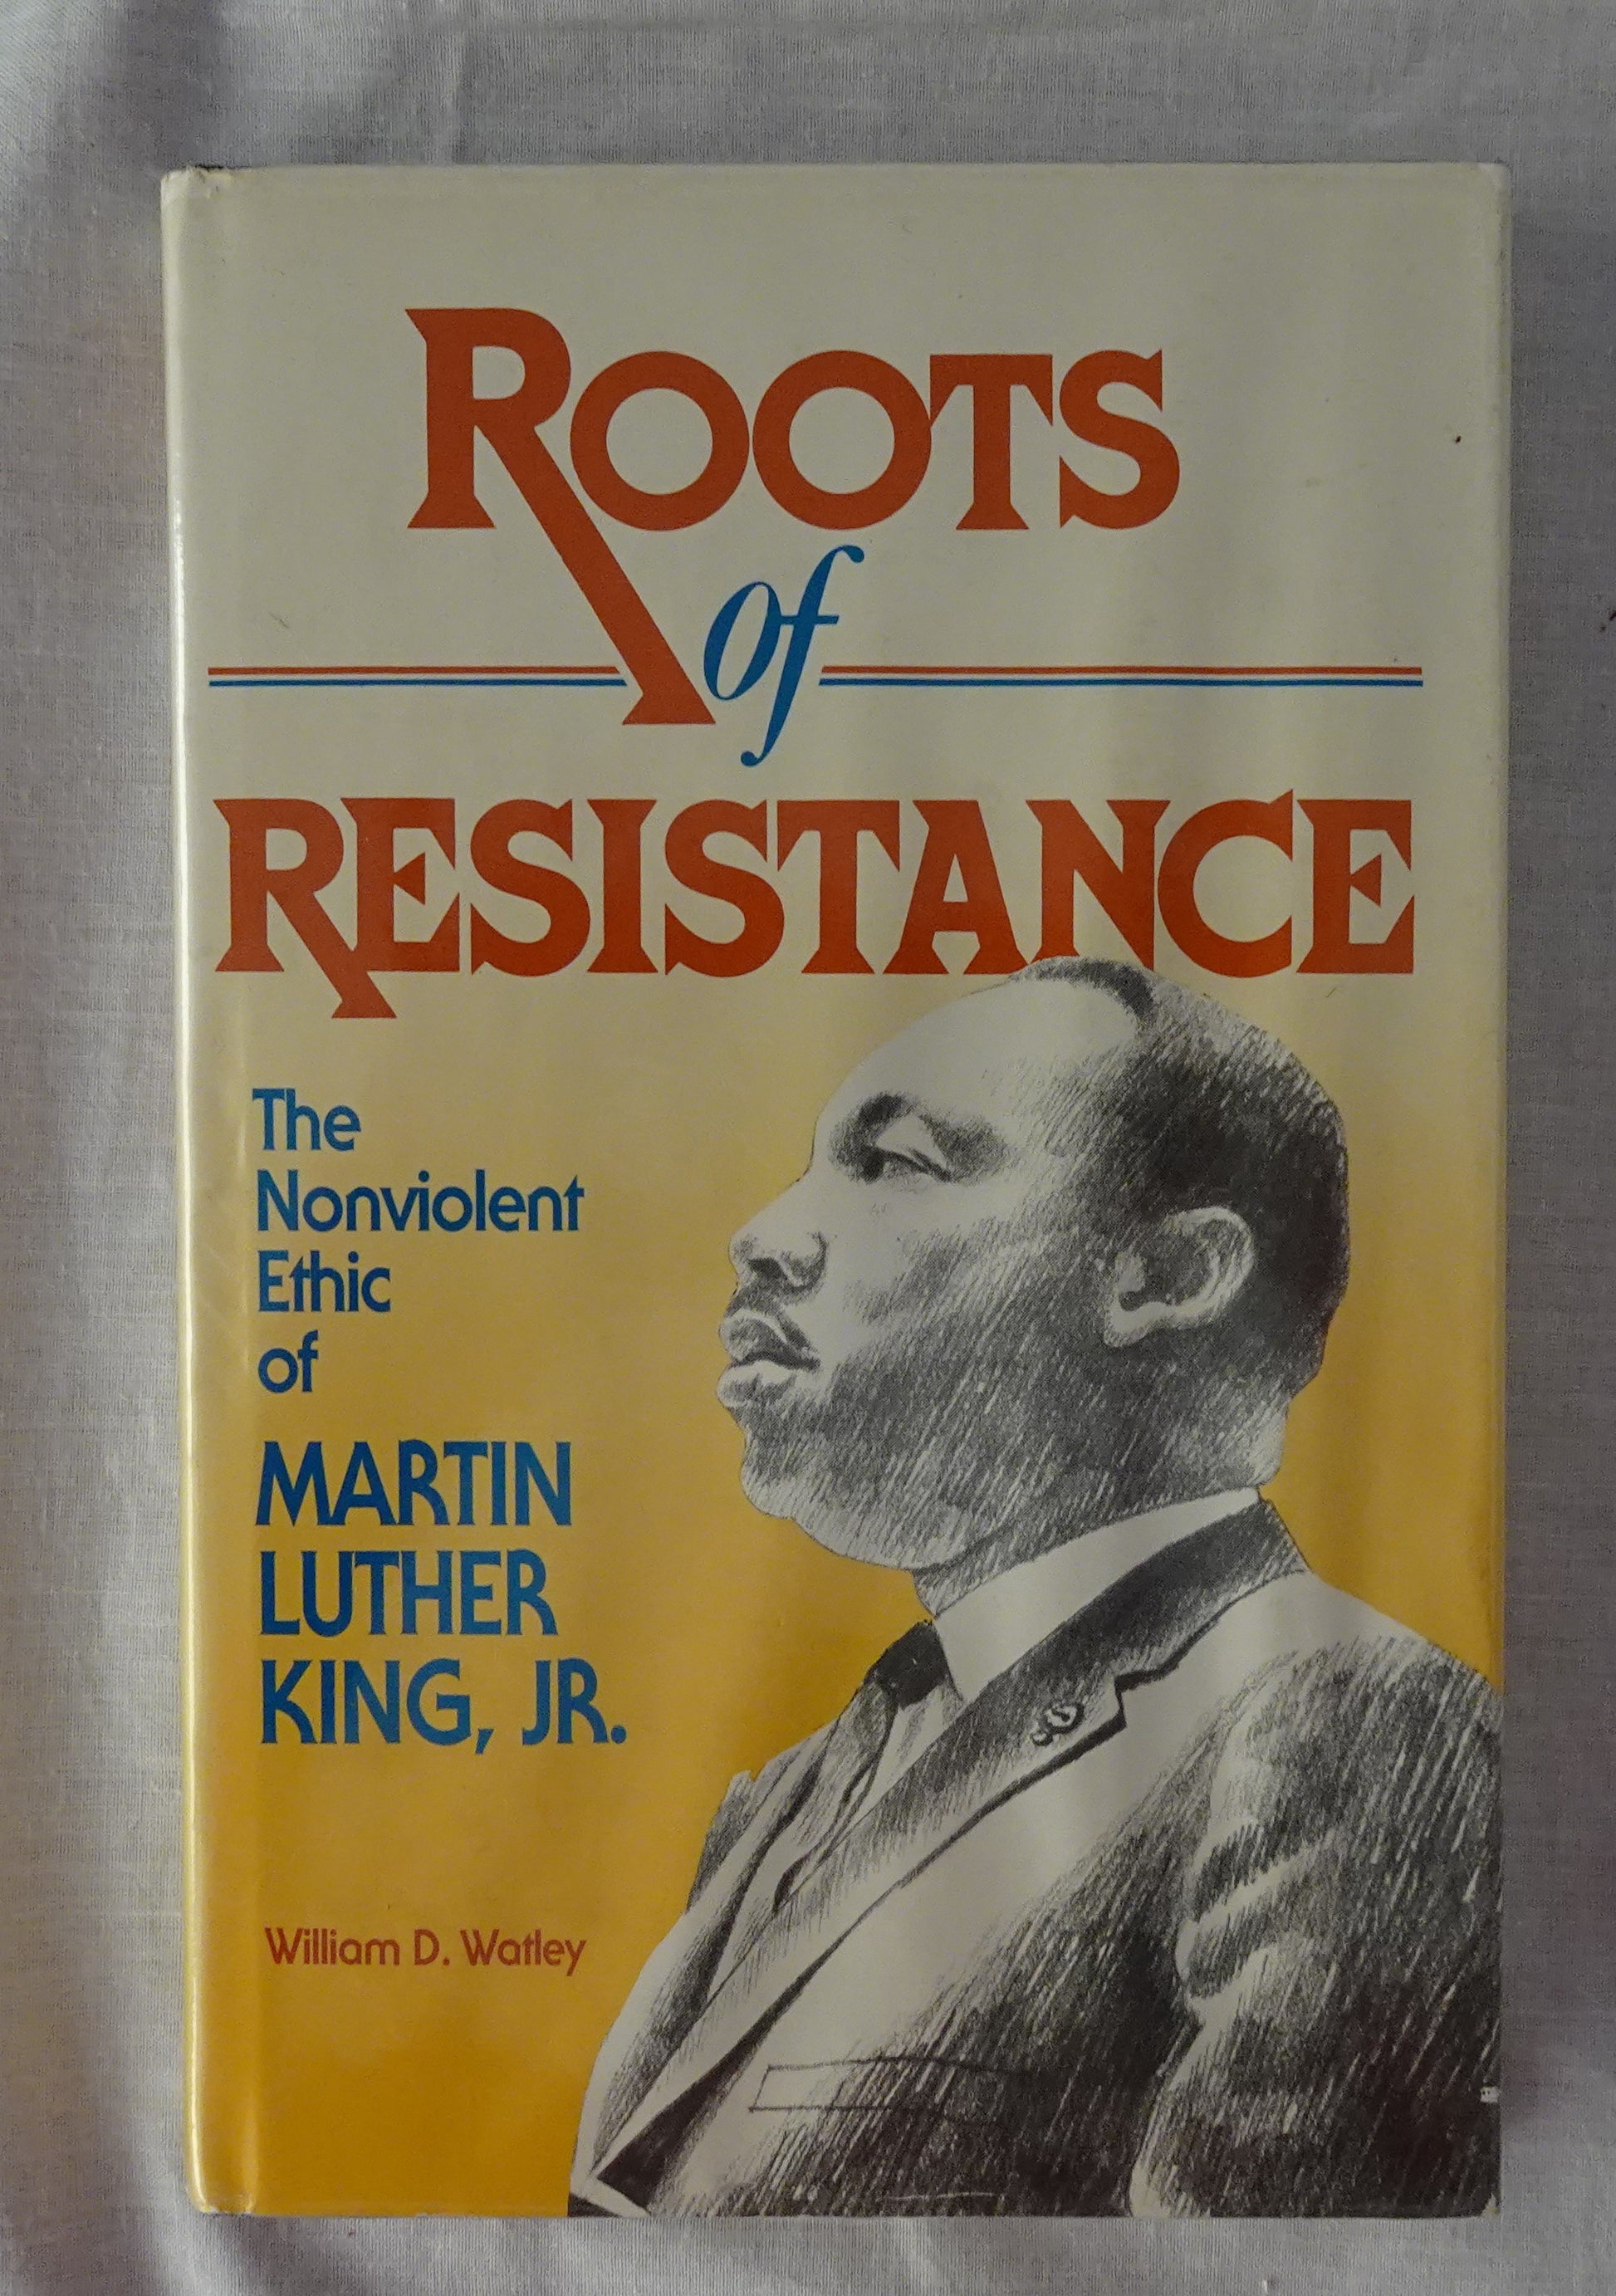 Roots of Resistance  The Nonviolent Ethic of Martin Luther King, JR.  By William D. Watley